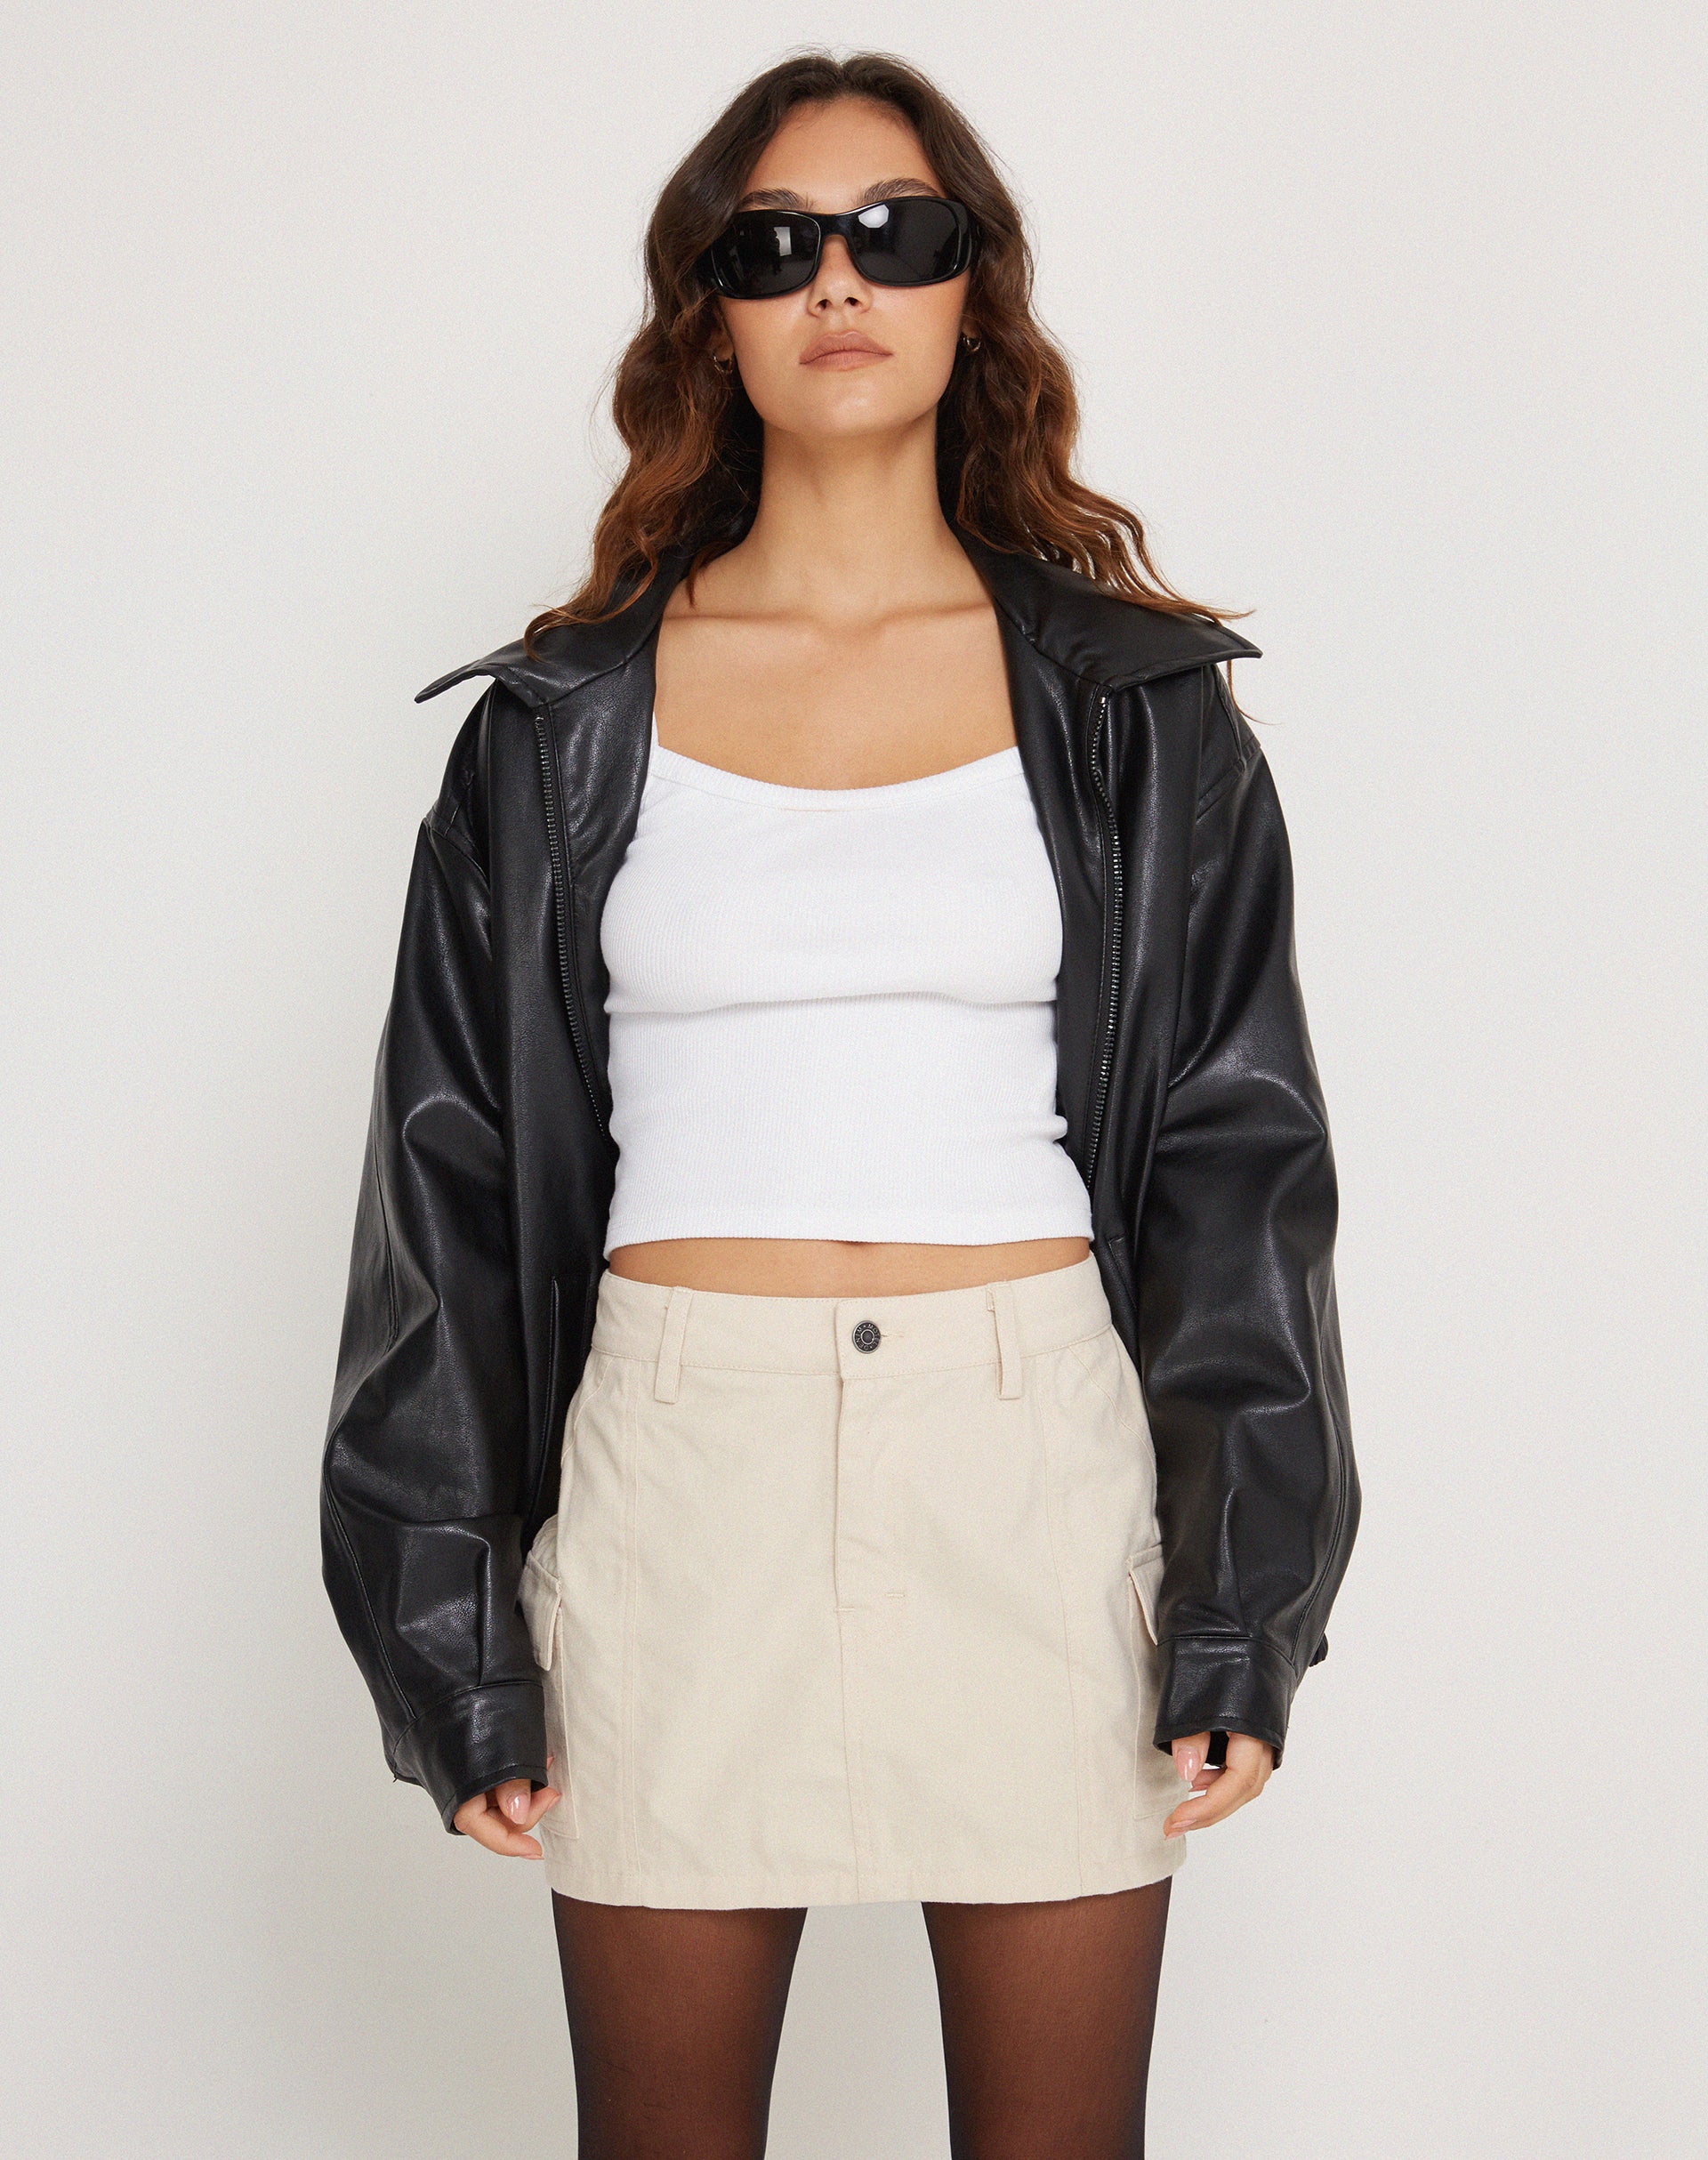 image of Ajeng Low Rise Cargo Mini Skirt in Ecru